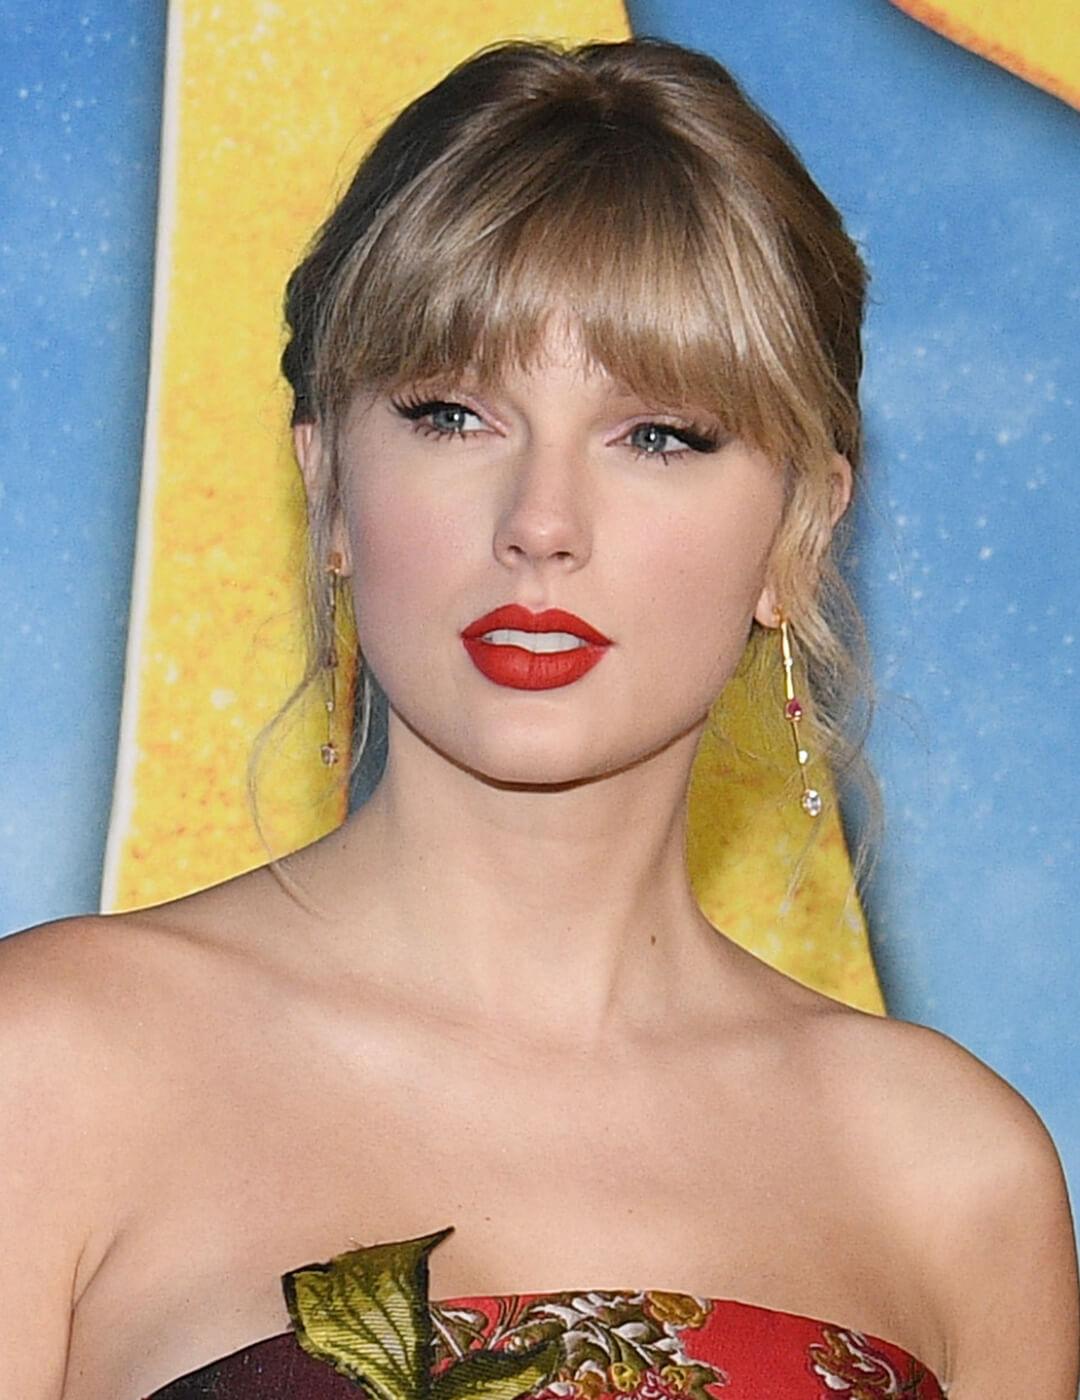 Taylor Swift rocking the red carpet in a floral dress and neutral makeup with red lips